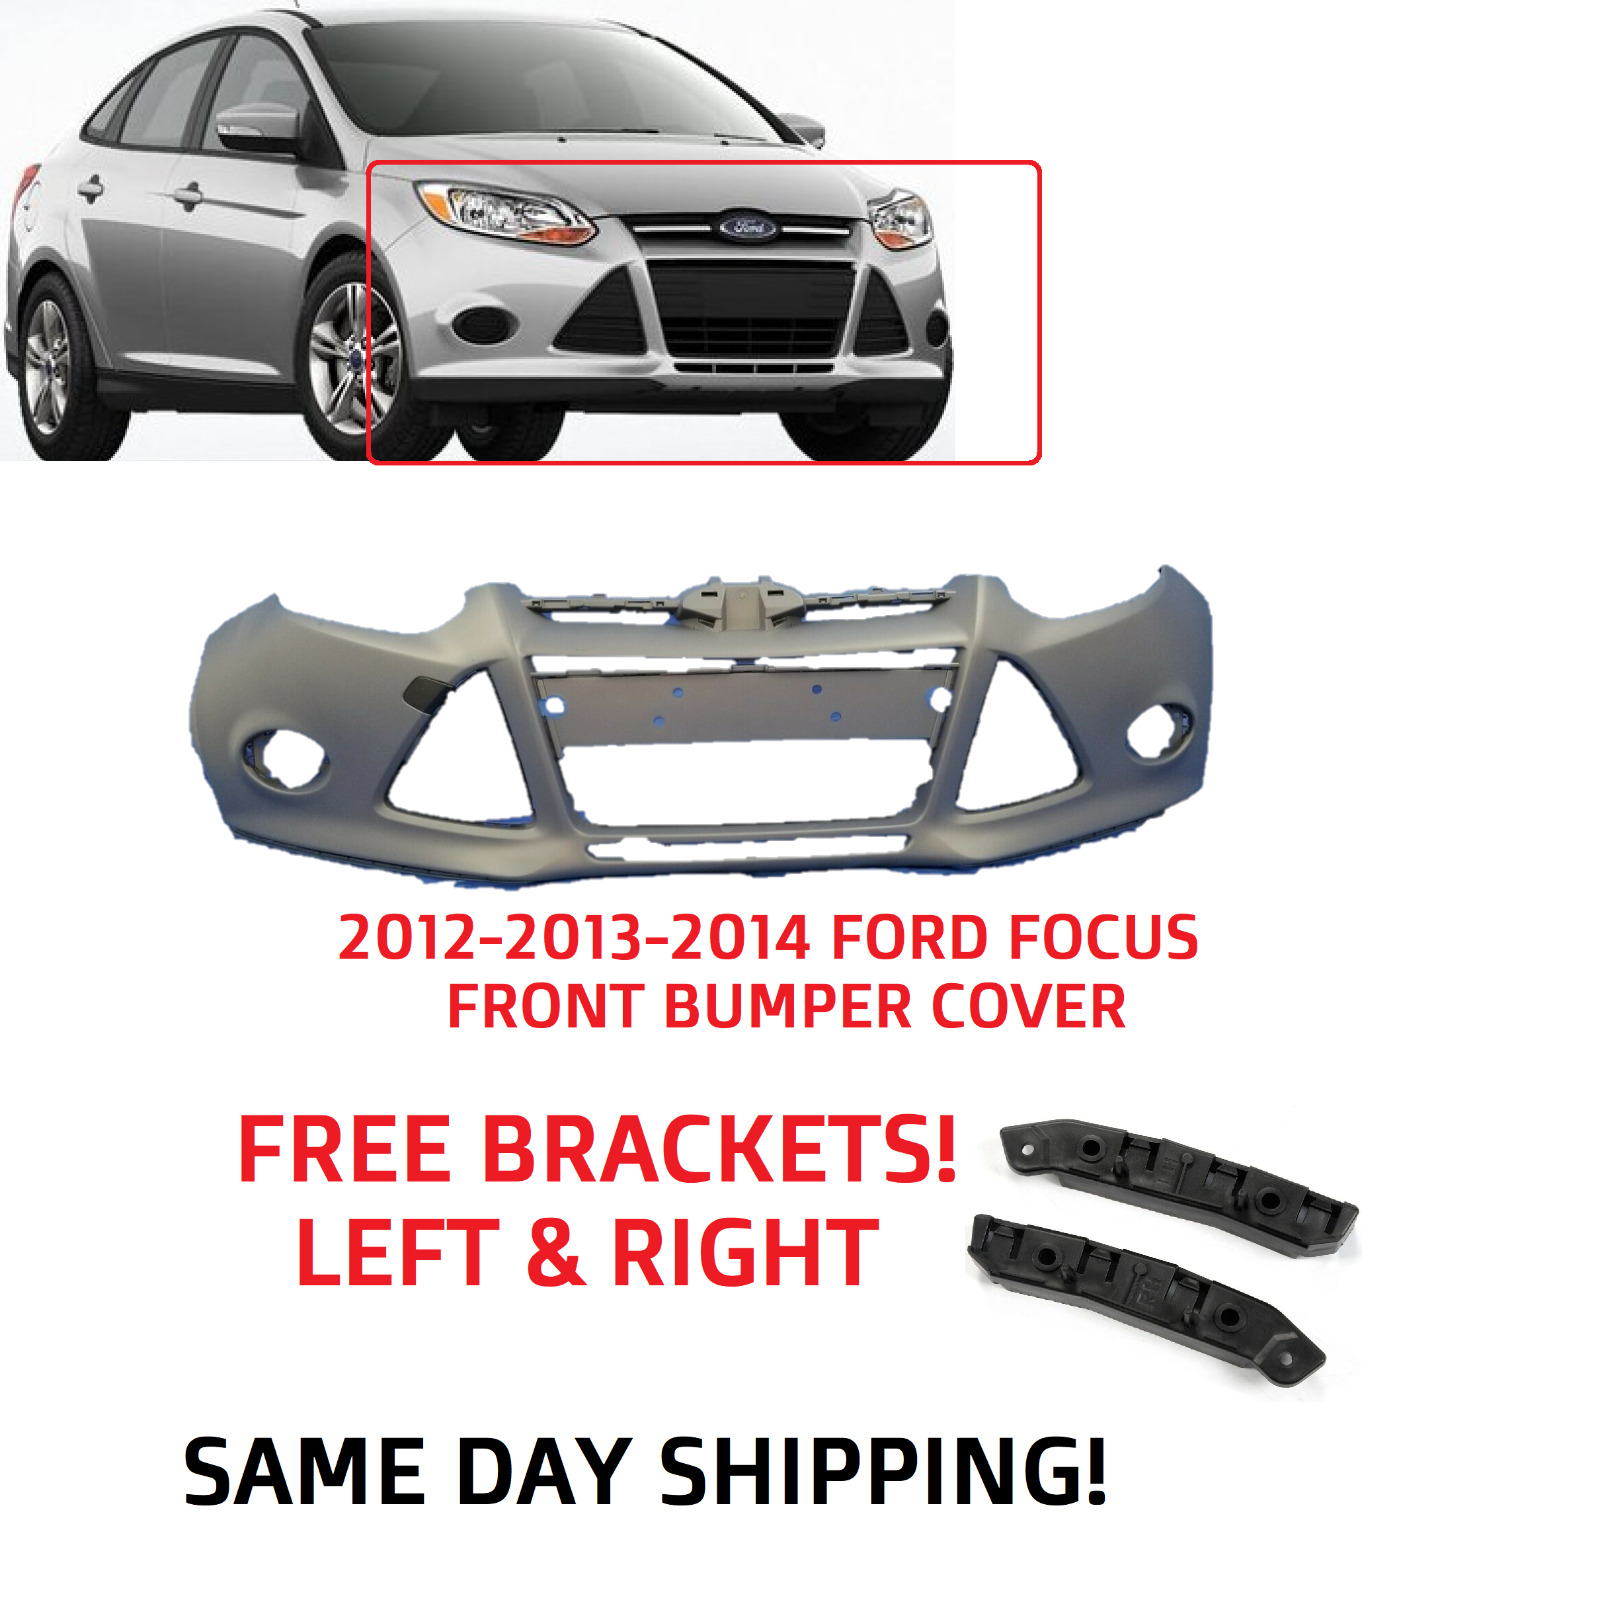 2012 2013 2014 FORD FOCUS FRONT BUMPER PRIMED READY FOR PAINT WITH FREE BRACKET 